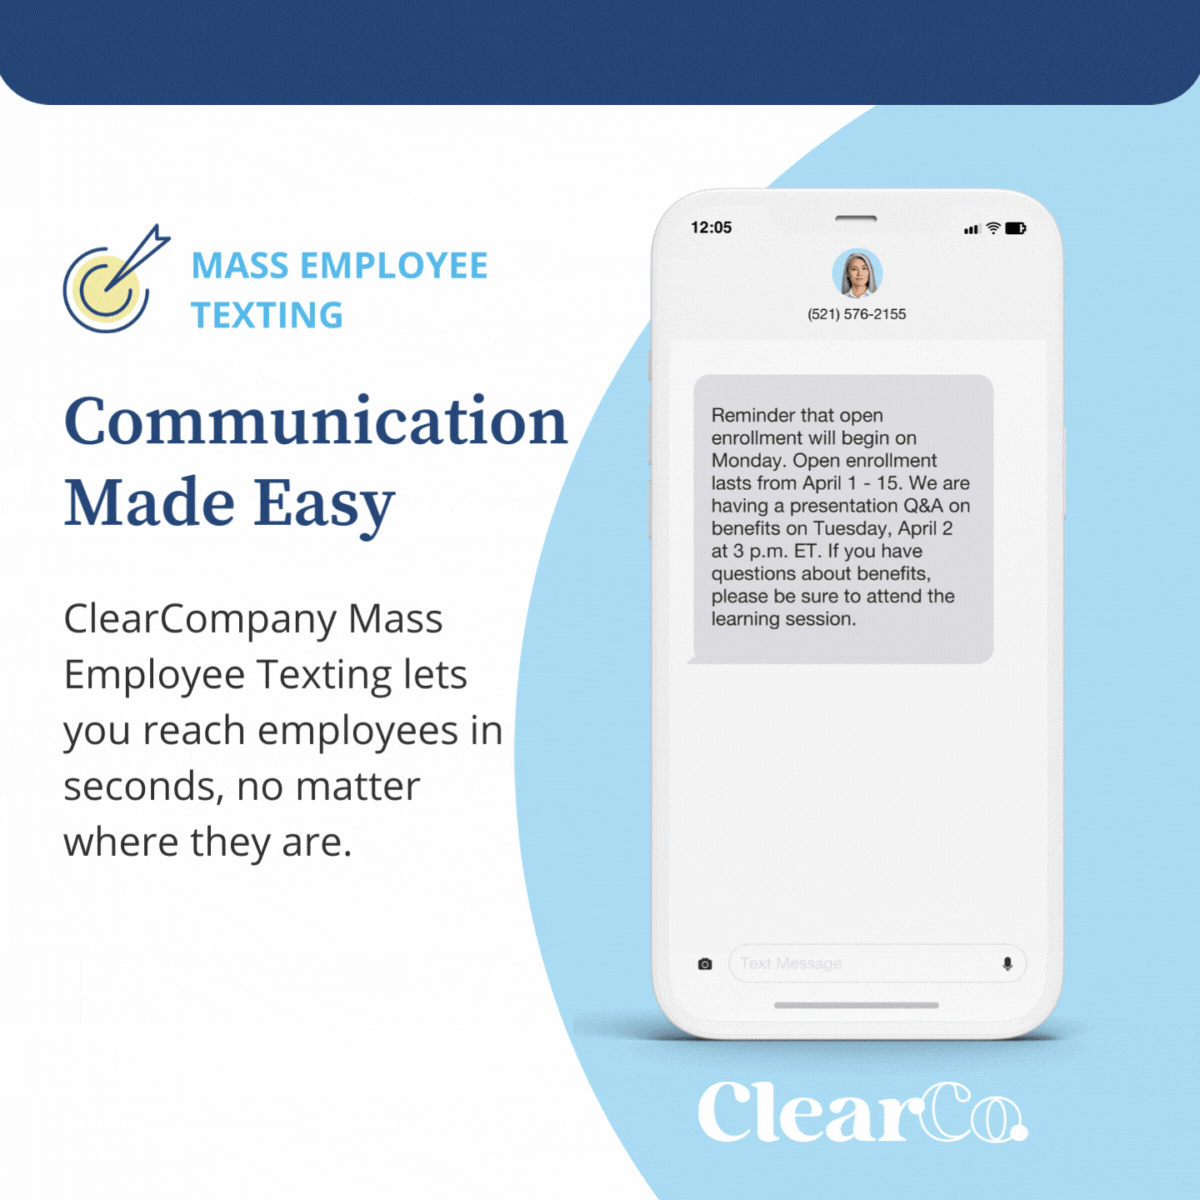 April Product Features mass employee texting